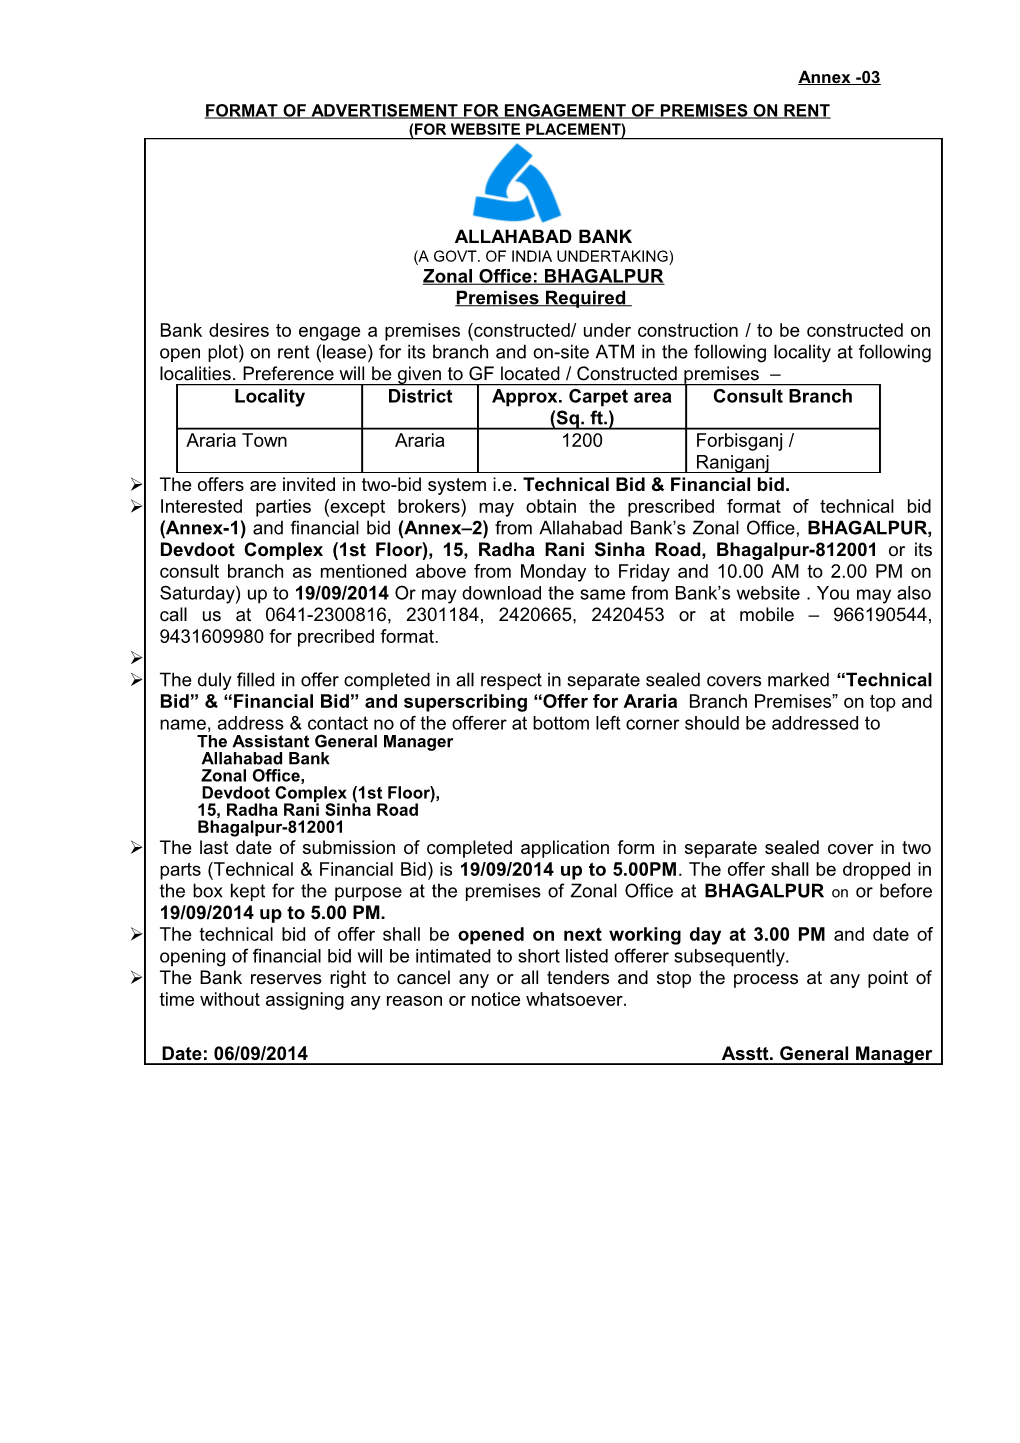 Format of Advertisement for Engagement of Premises on Rent